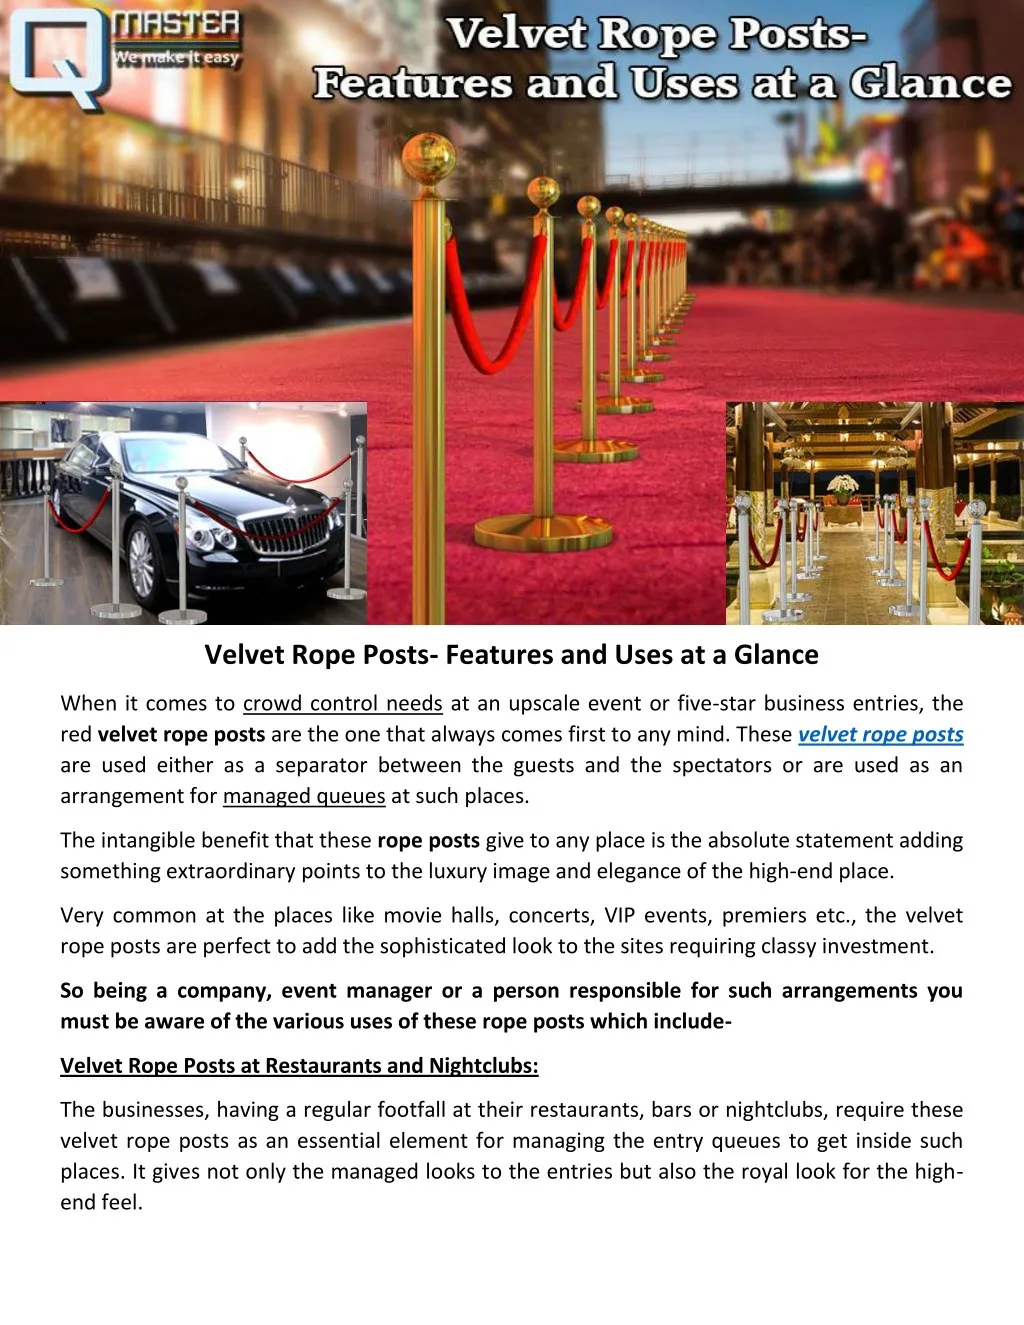 velvet rope posts features and uses at a glance